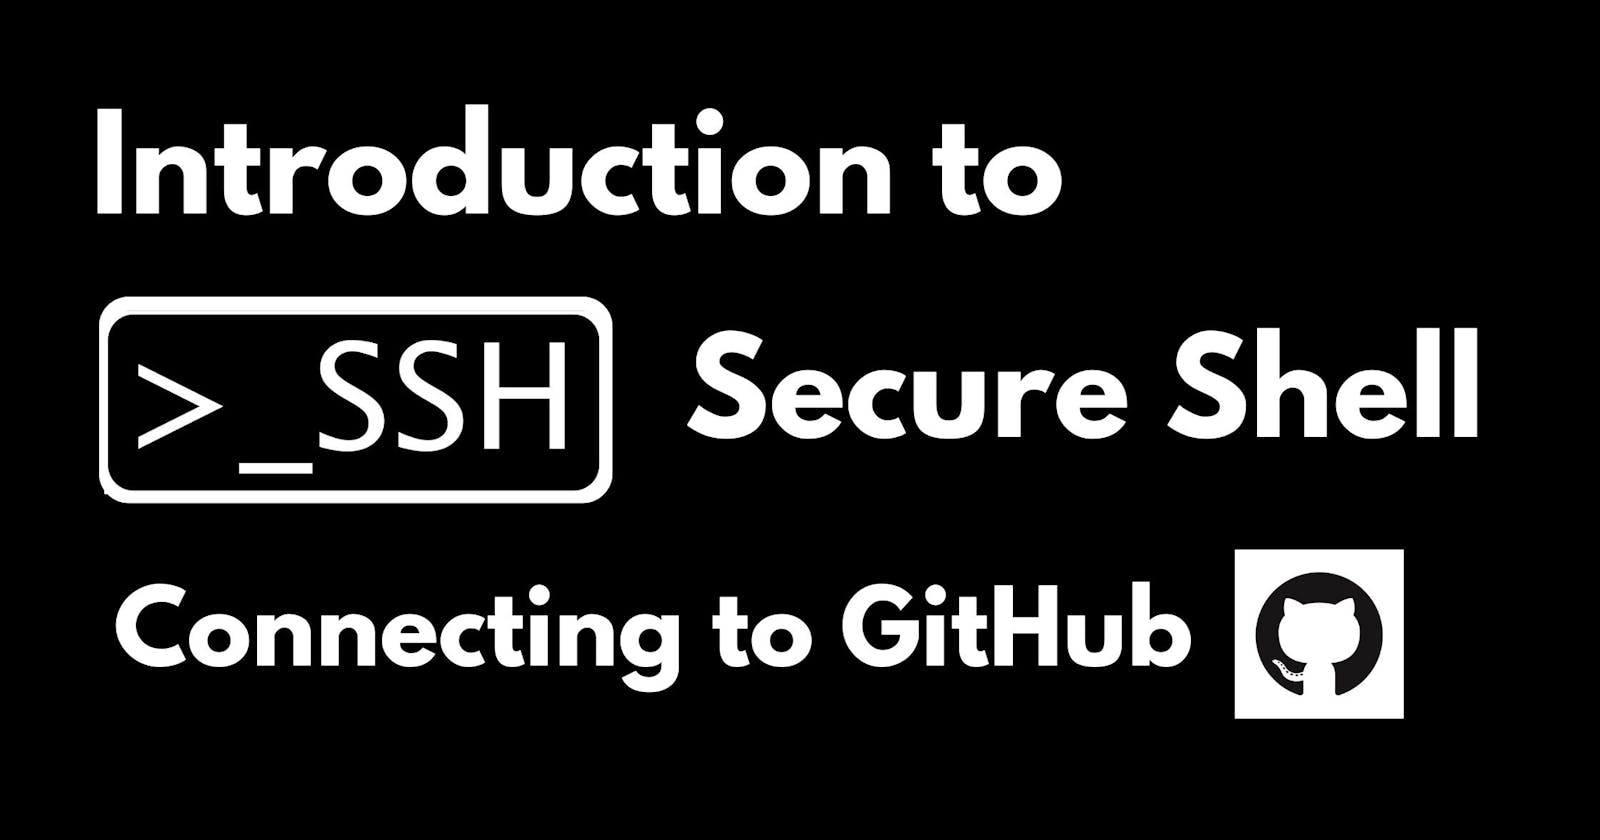 Introduction to SSH and Encryption [Beginners]